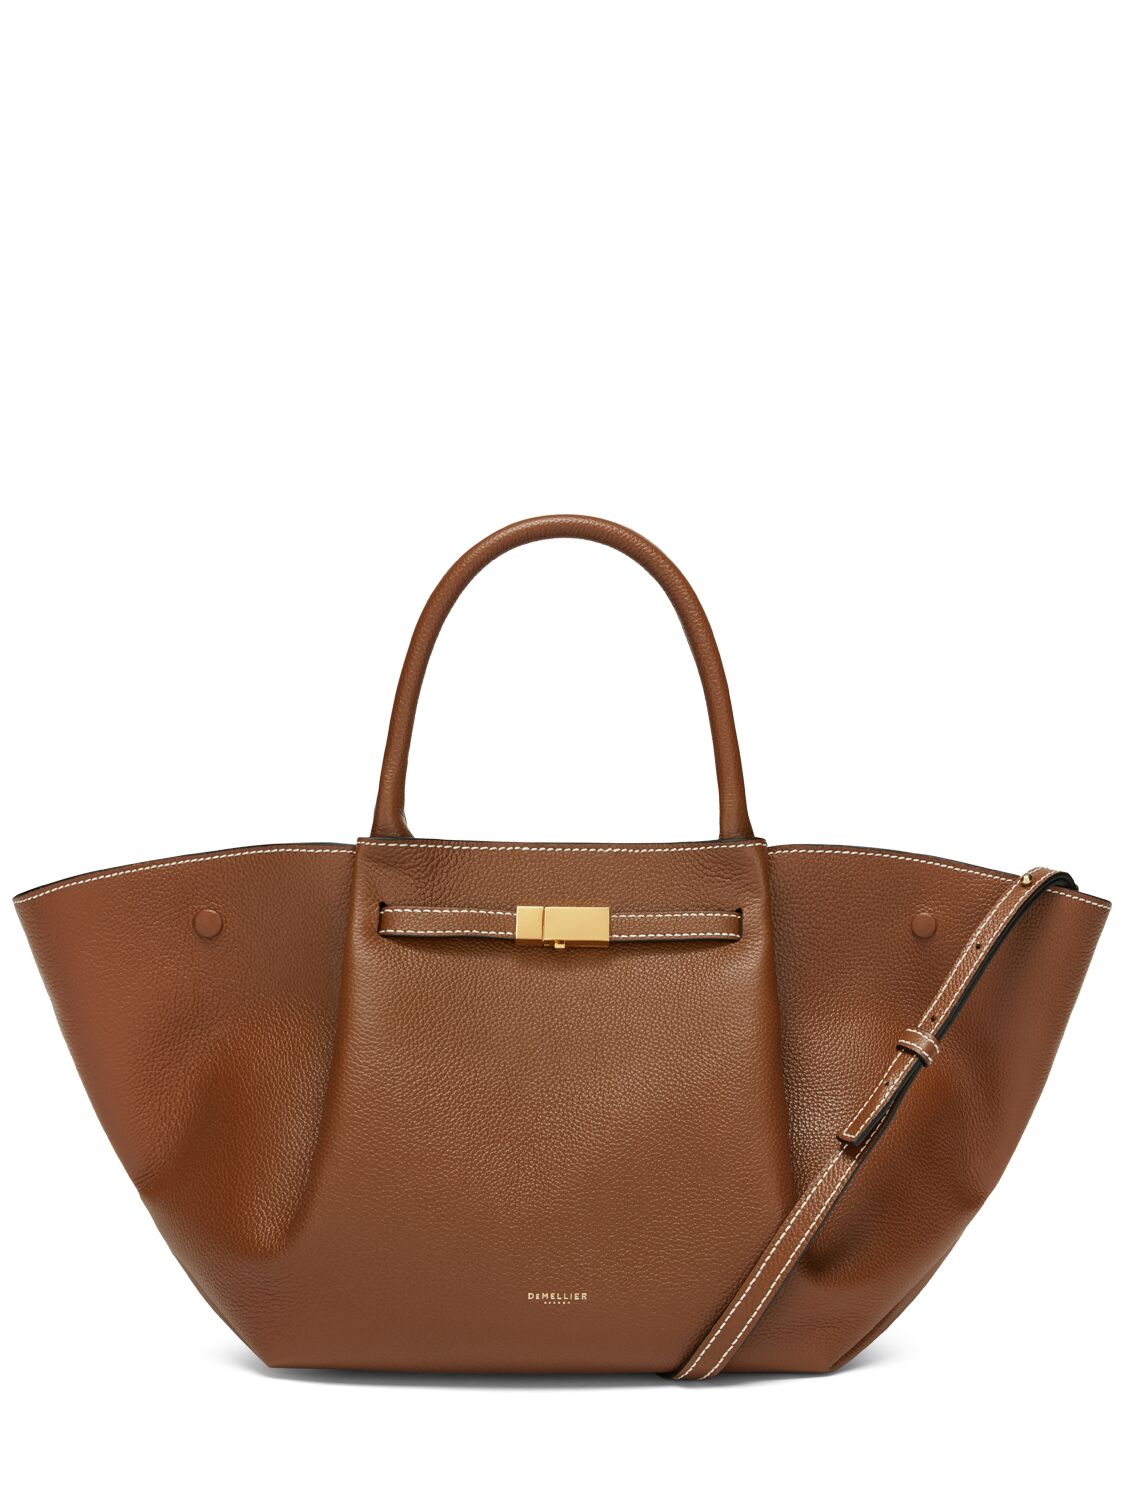 Demellier Midi New York Grained Leather Tote Bag In Tan